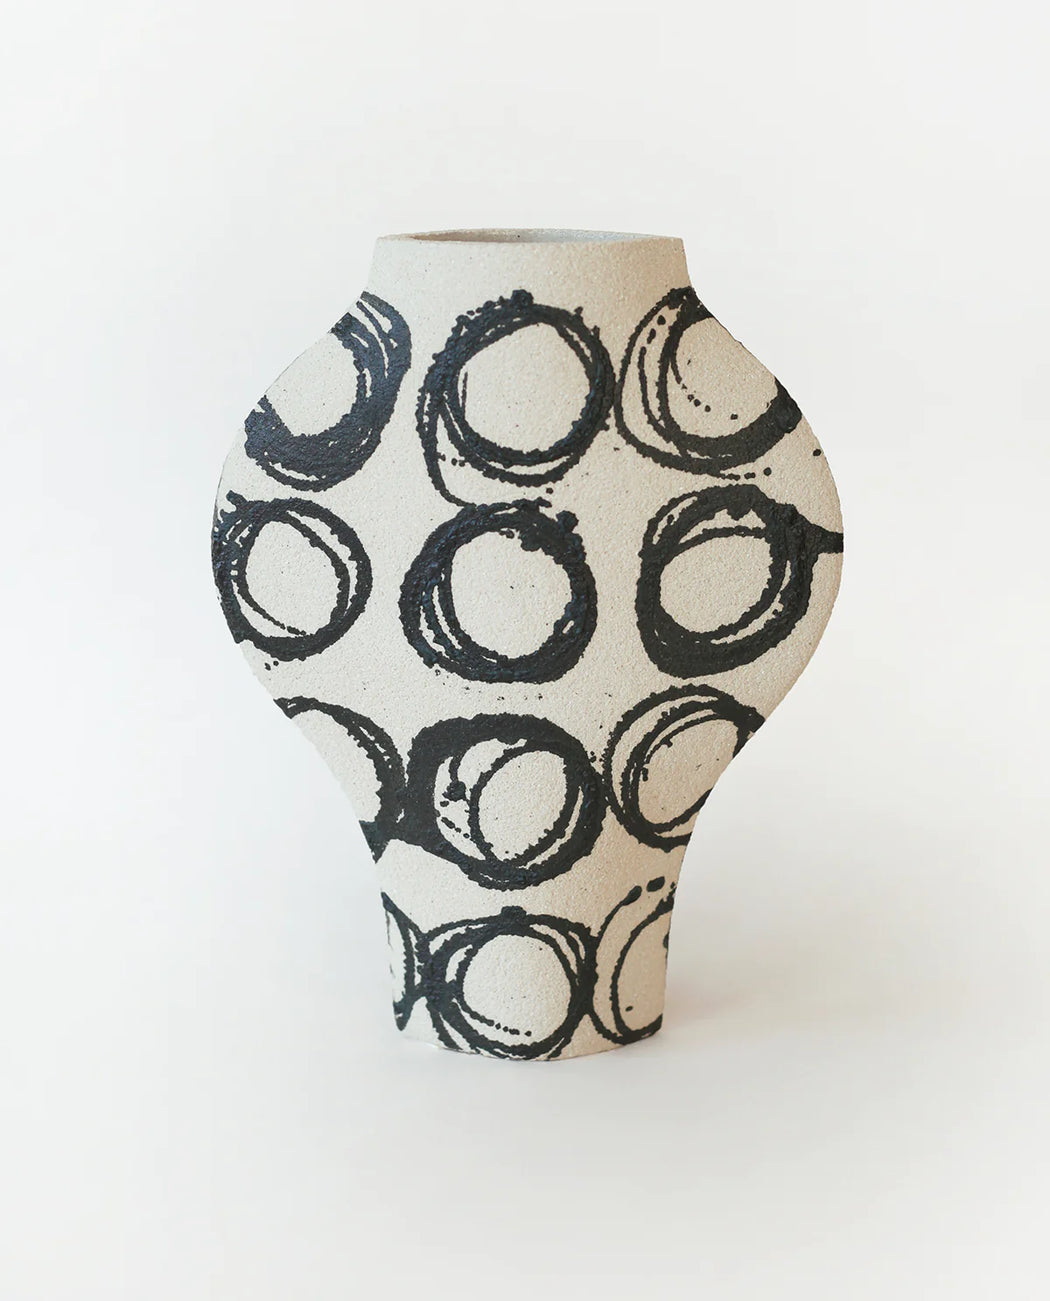 Dal Vase “Dripping Rounds”